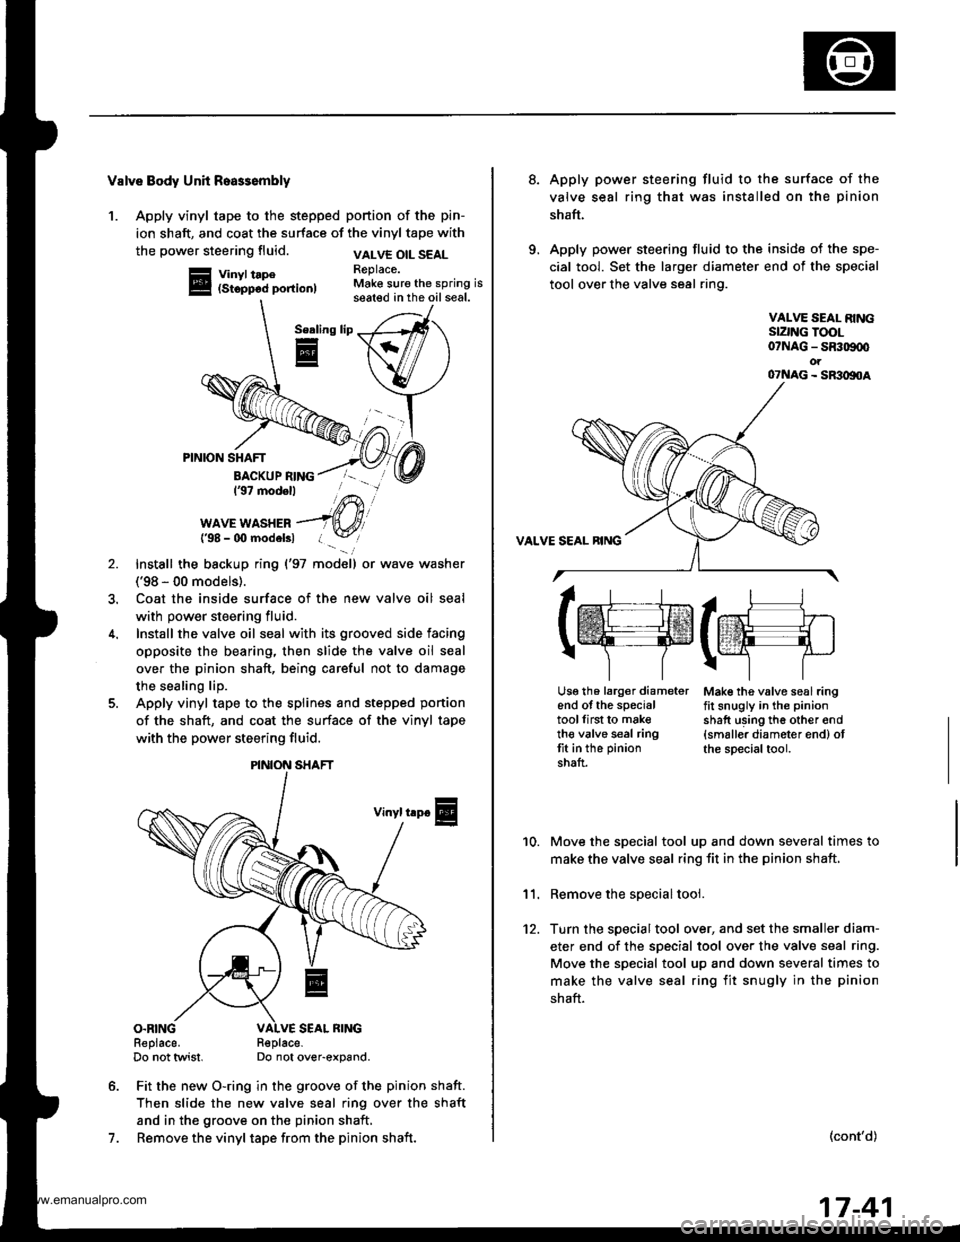 HONDA CR-V 1999 RD1-RD3 / 1.G Workshop Manual 
Valve Body Unh Roa$embly
1. Apply vinyl tape to the stepped portion of the pin-
ion shaft, and coat the surface of the vinyl tape with
the power steering fluid.
Vinyl tape(Stopp6d portion)
VALVE OIL 